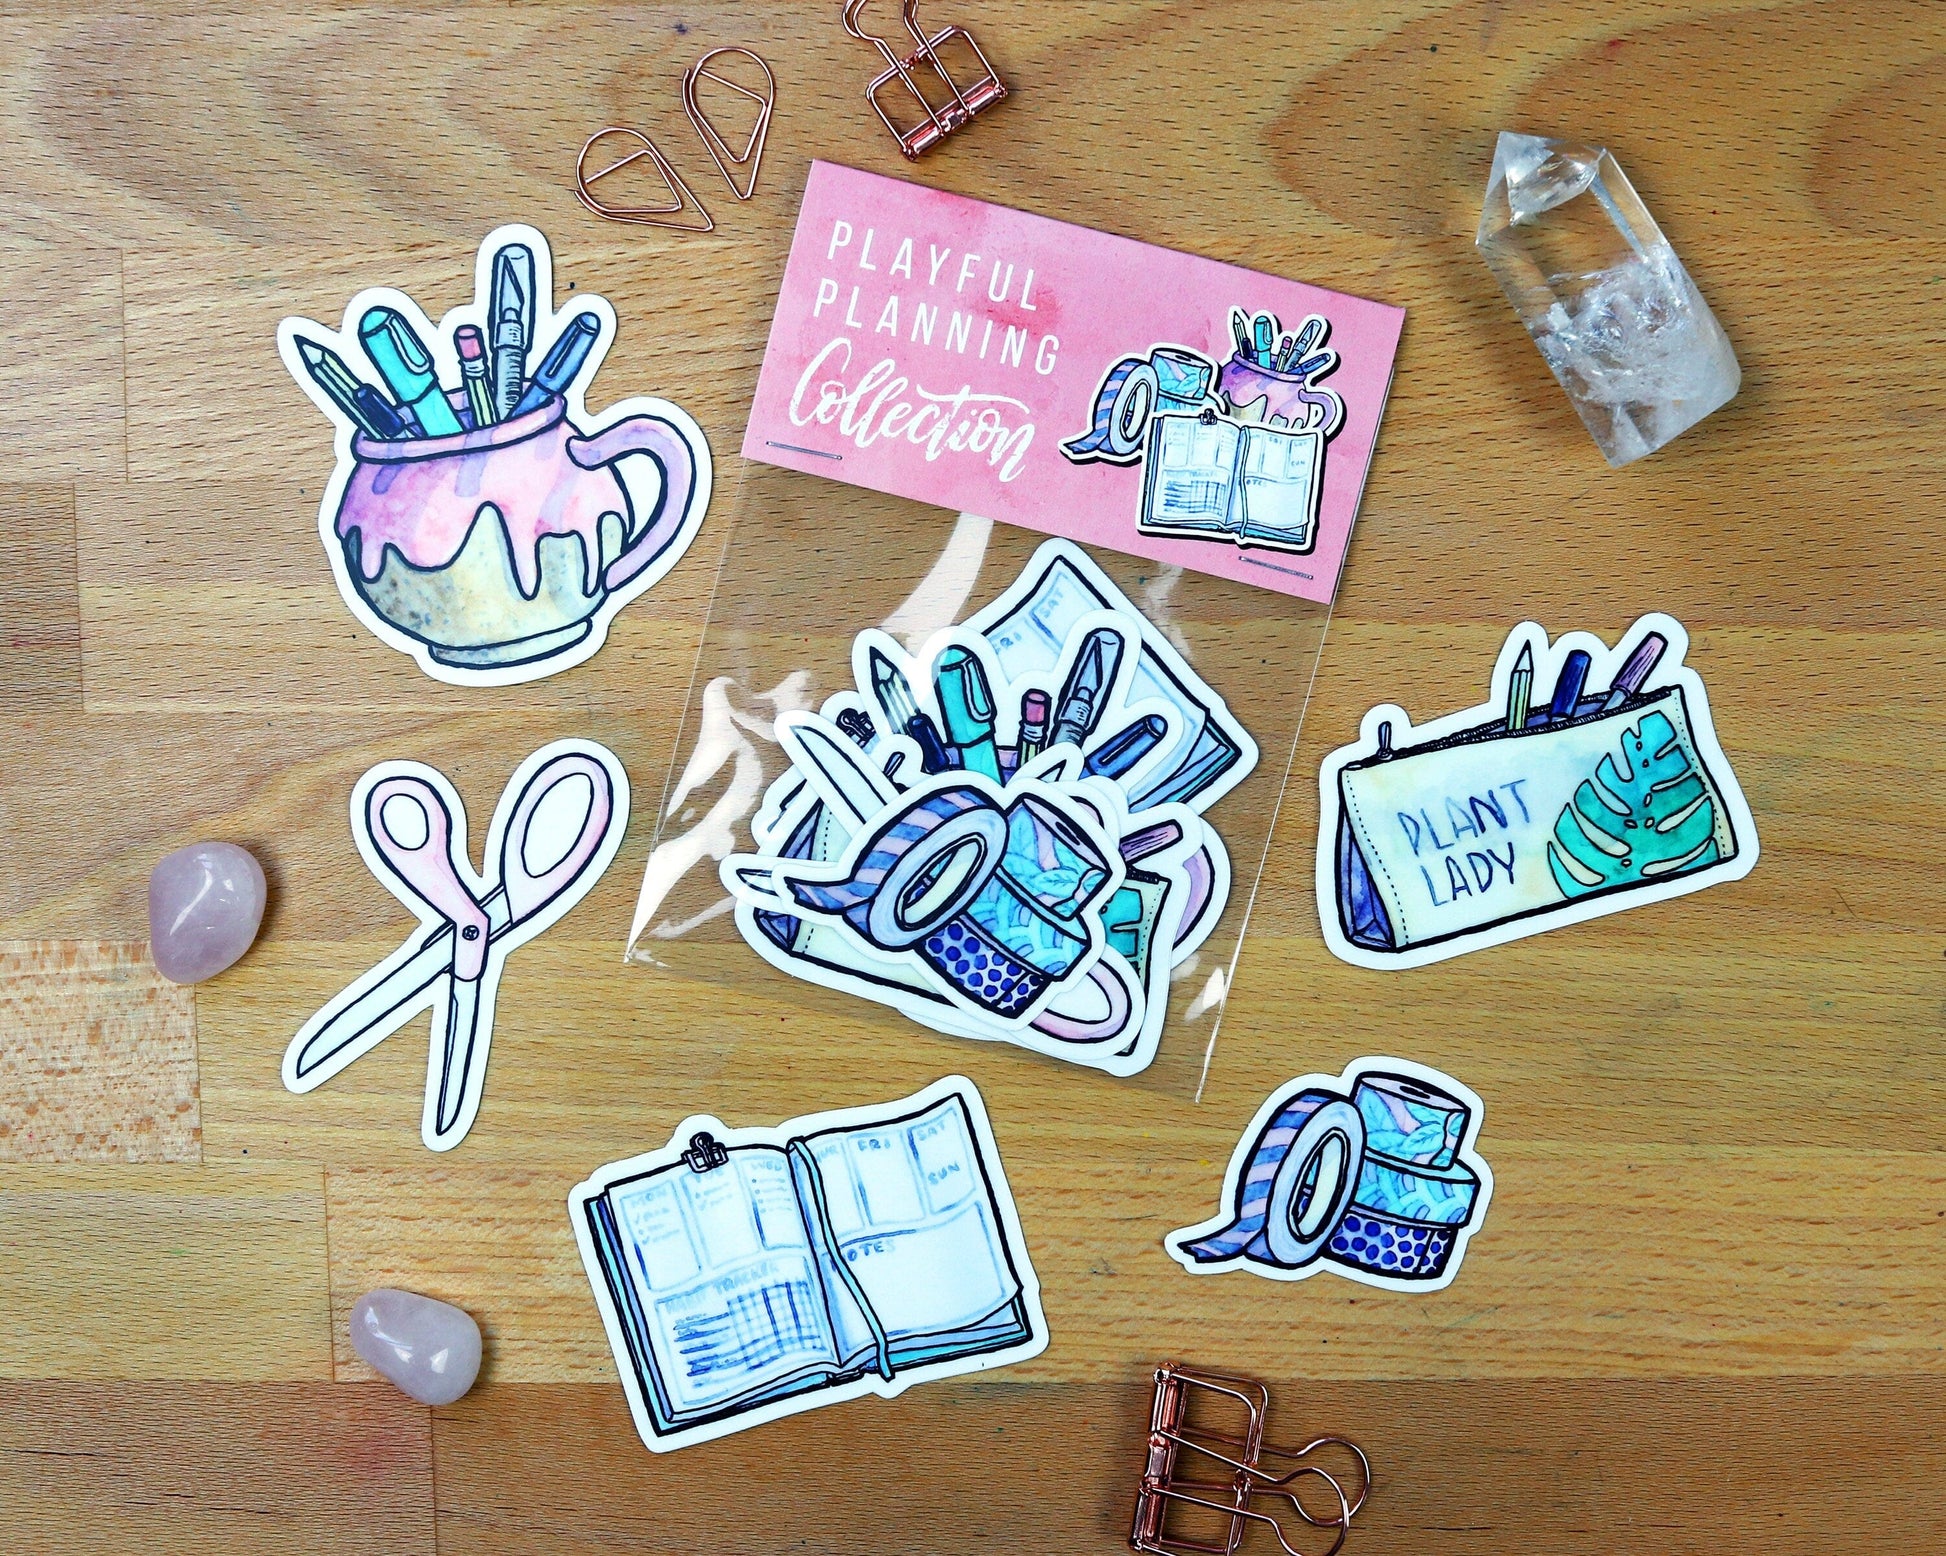 Playful Planning 5 Stickers Collection: Fun Hand Painted Die Cut Stationery Art Bullet Journal Stickers Set for Journals, Planners & Laptops